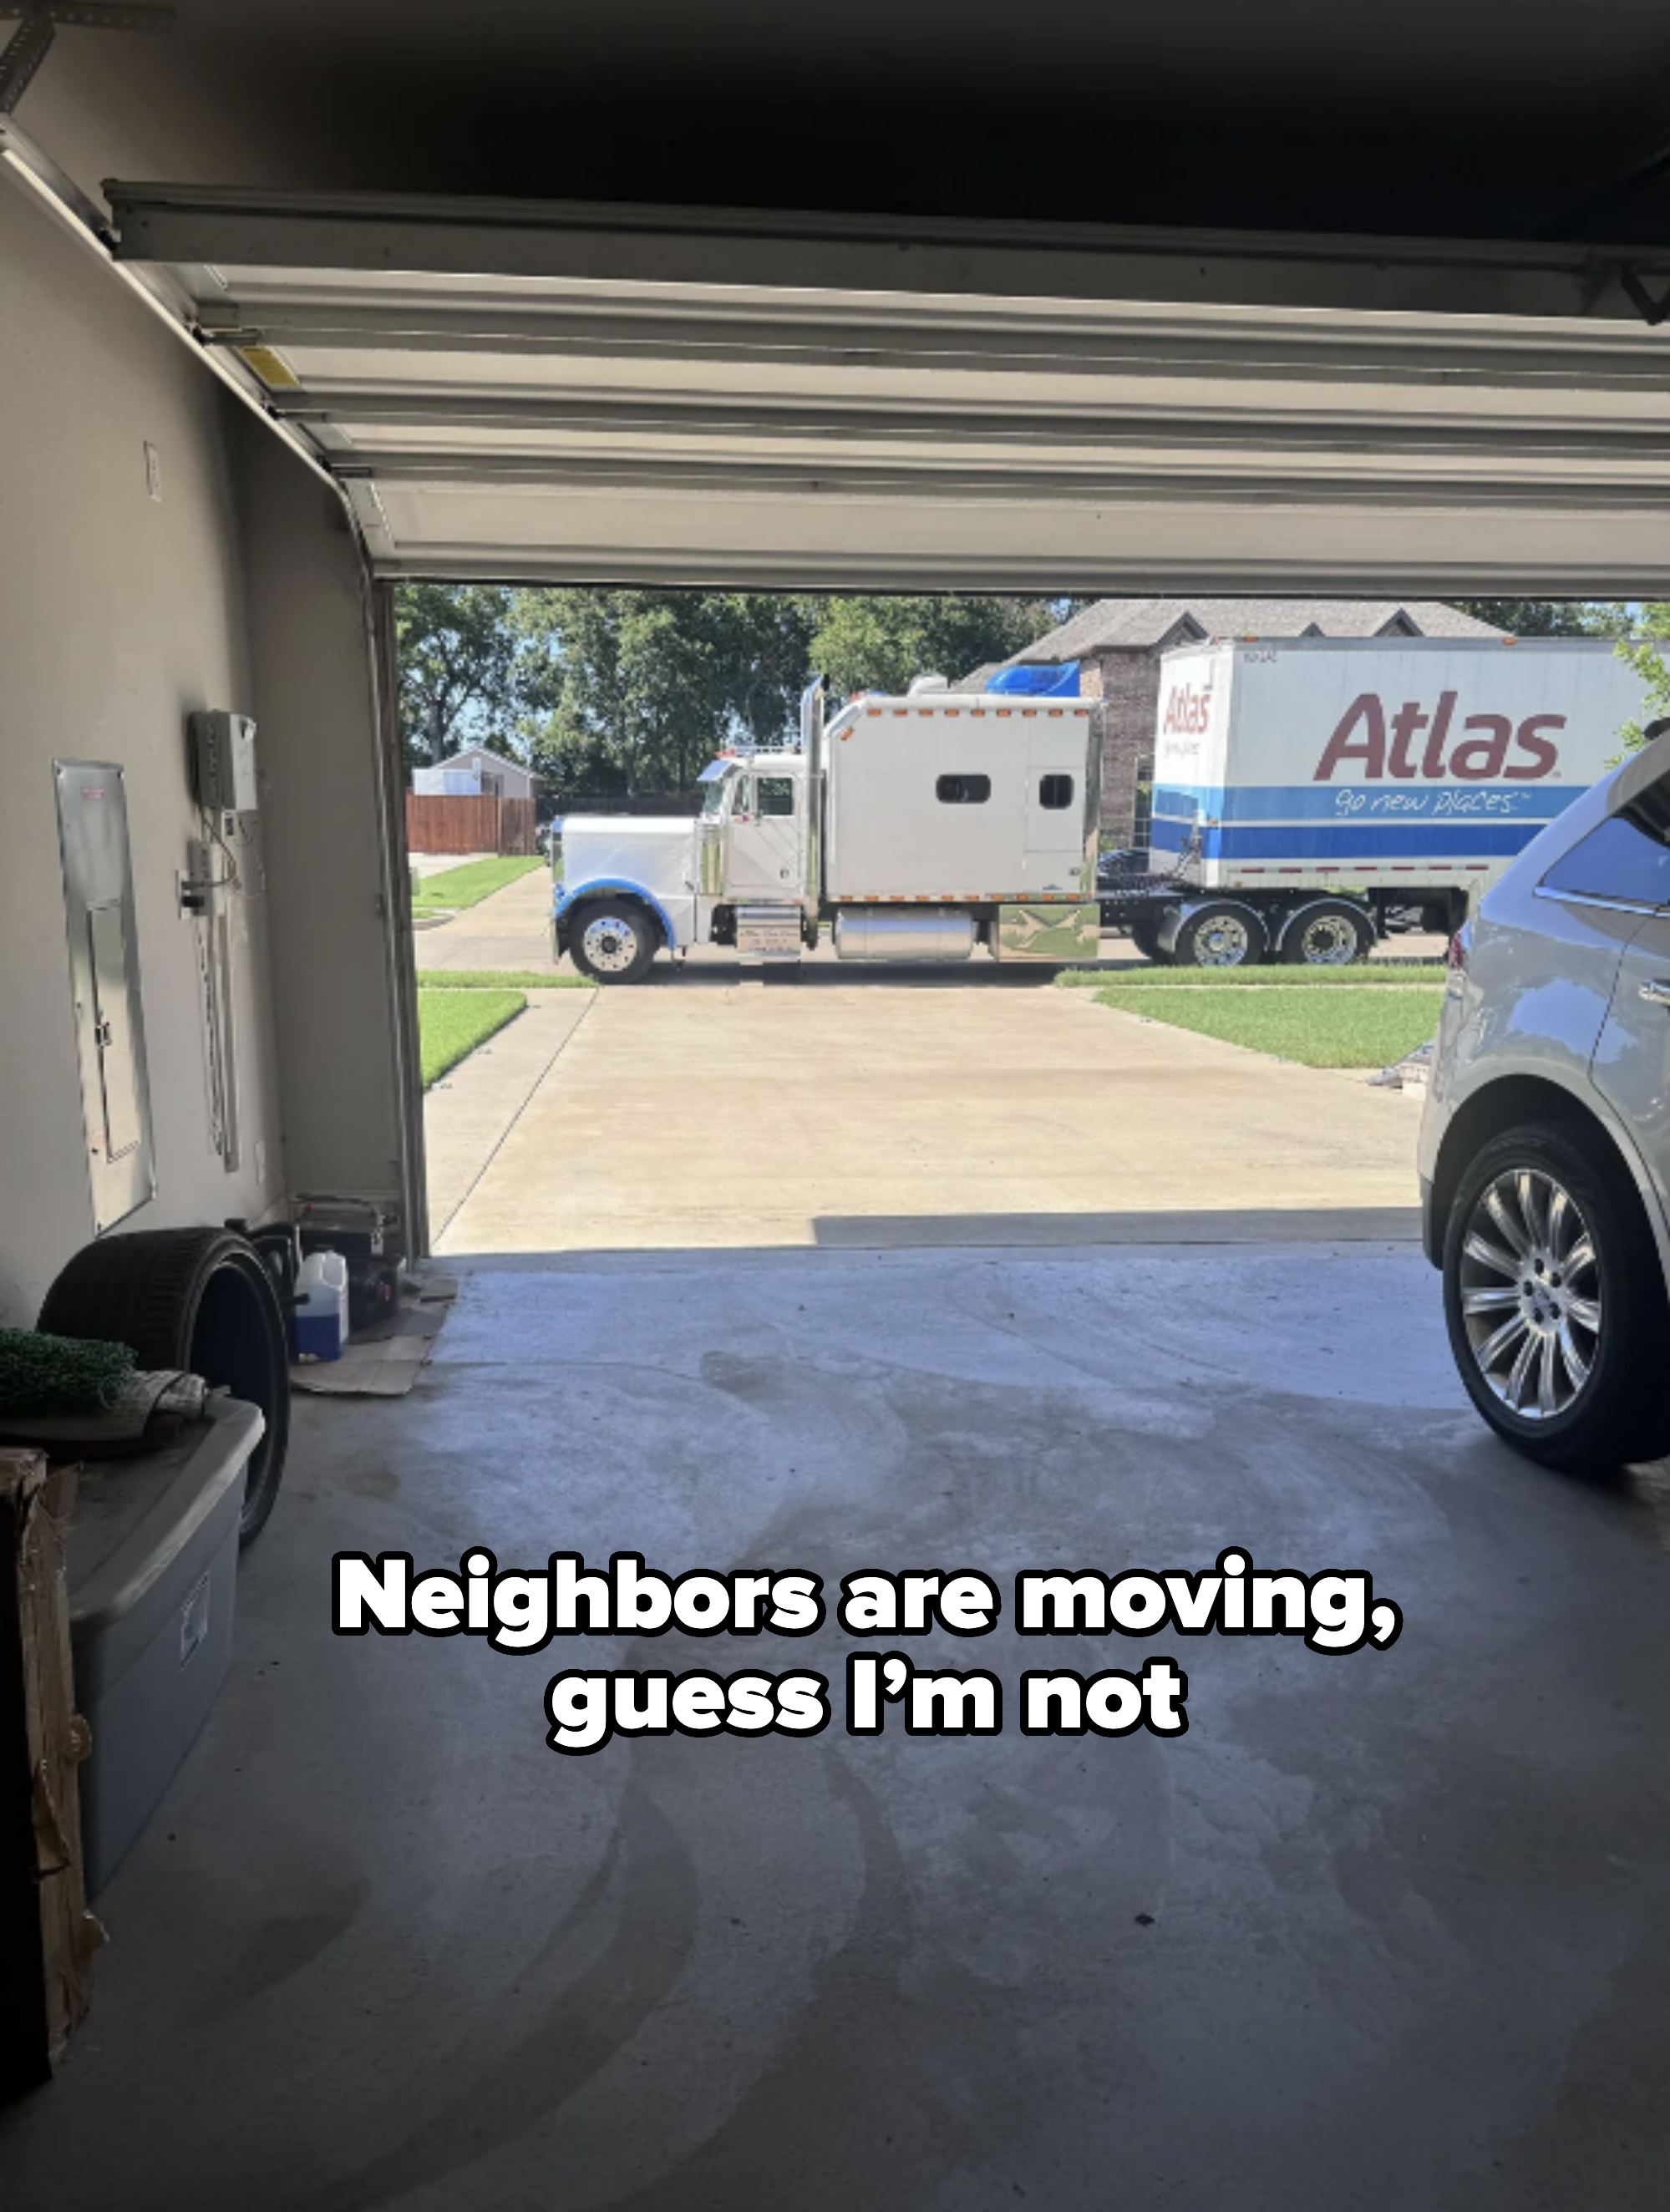 View from inside a garage looking out to a driveway where a moving truck labeled &quot;Atlas&quot; is parked